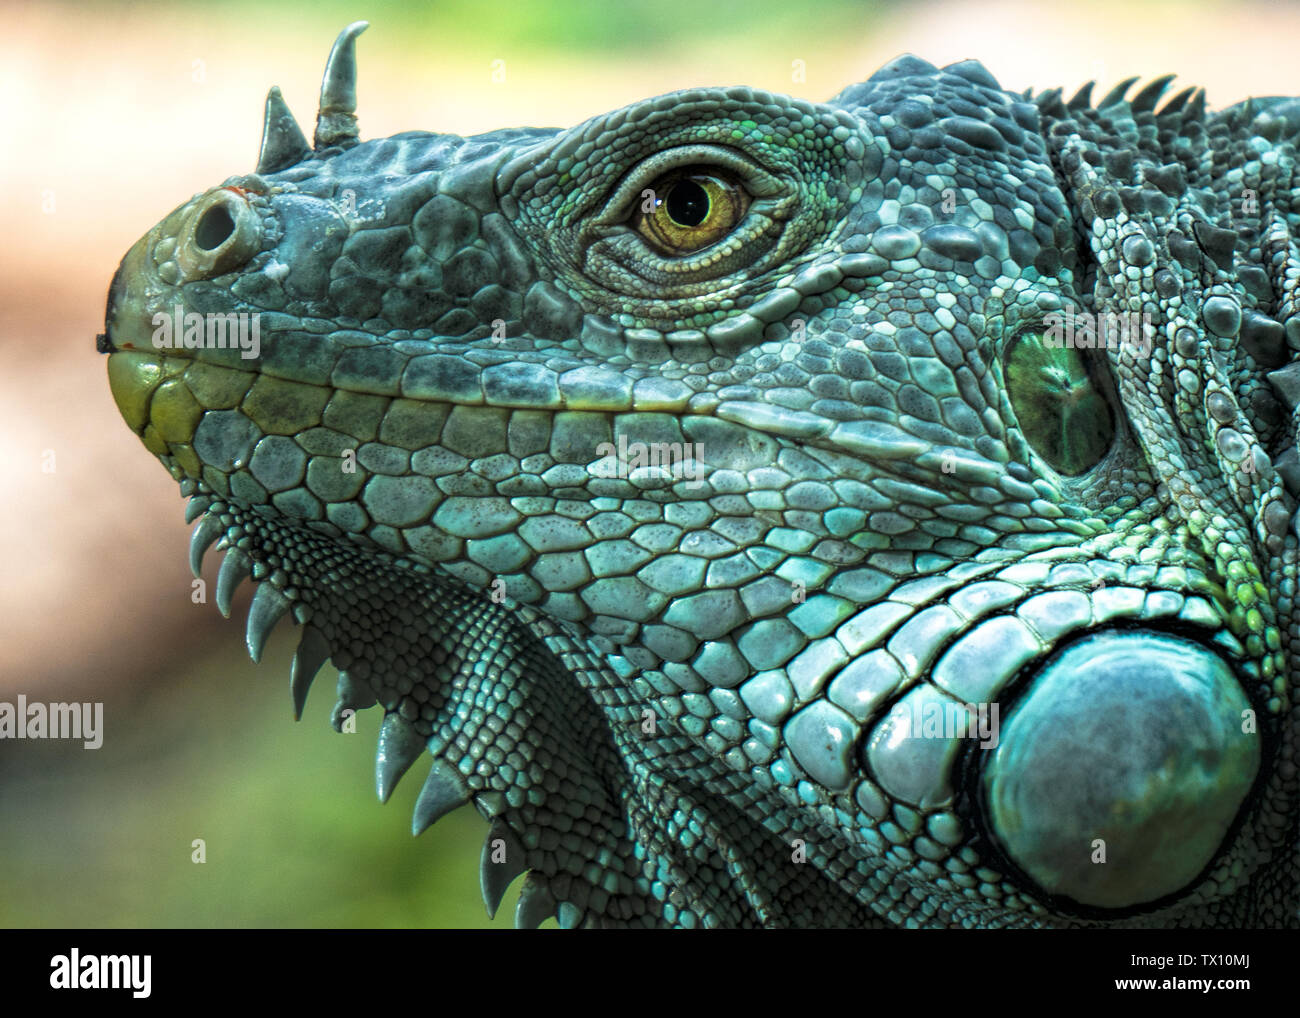 A green iguana closeup of its face  showing details of scales, spine and eye. Stock Photo